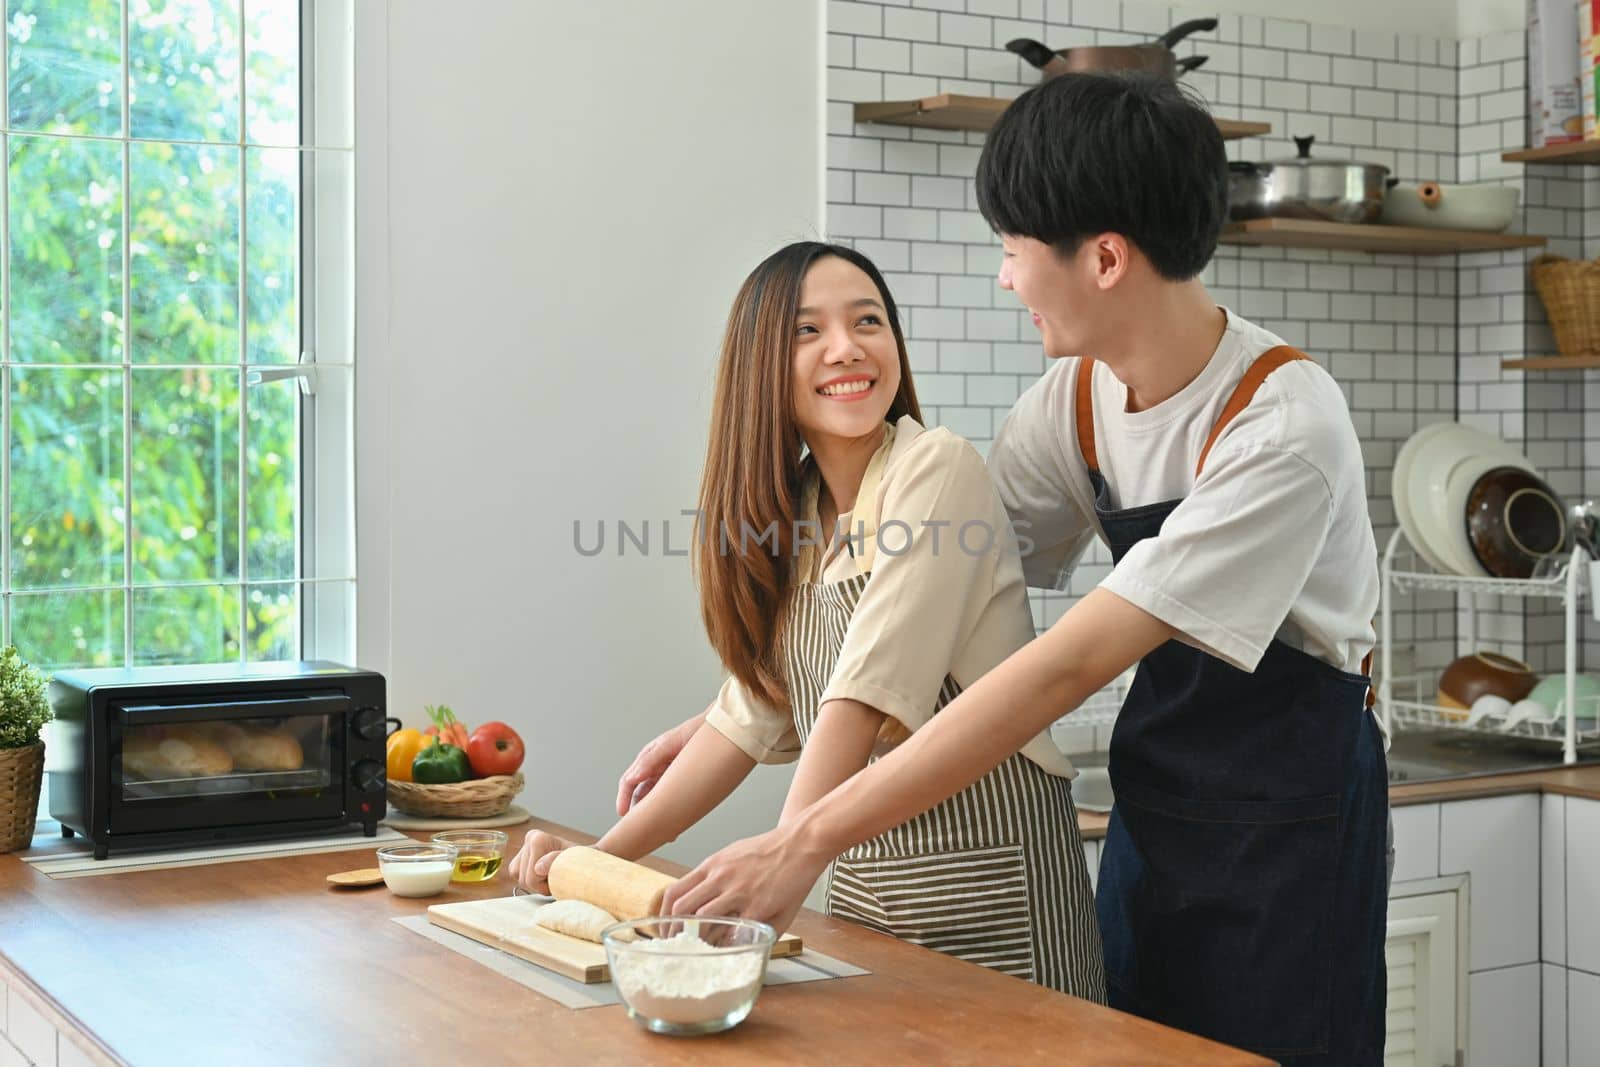 Cheerful young couple wearing aprons preparing homemade pastry, enjoying leisure time together at home.